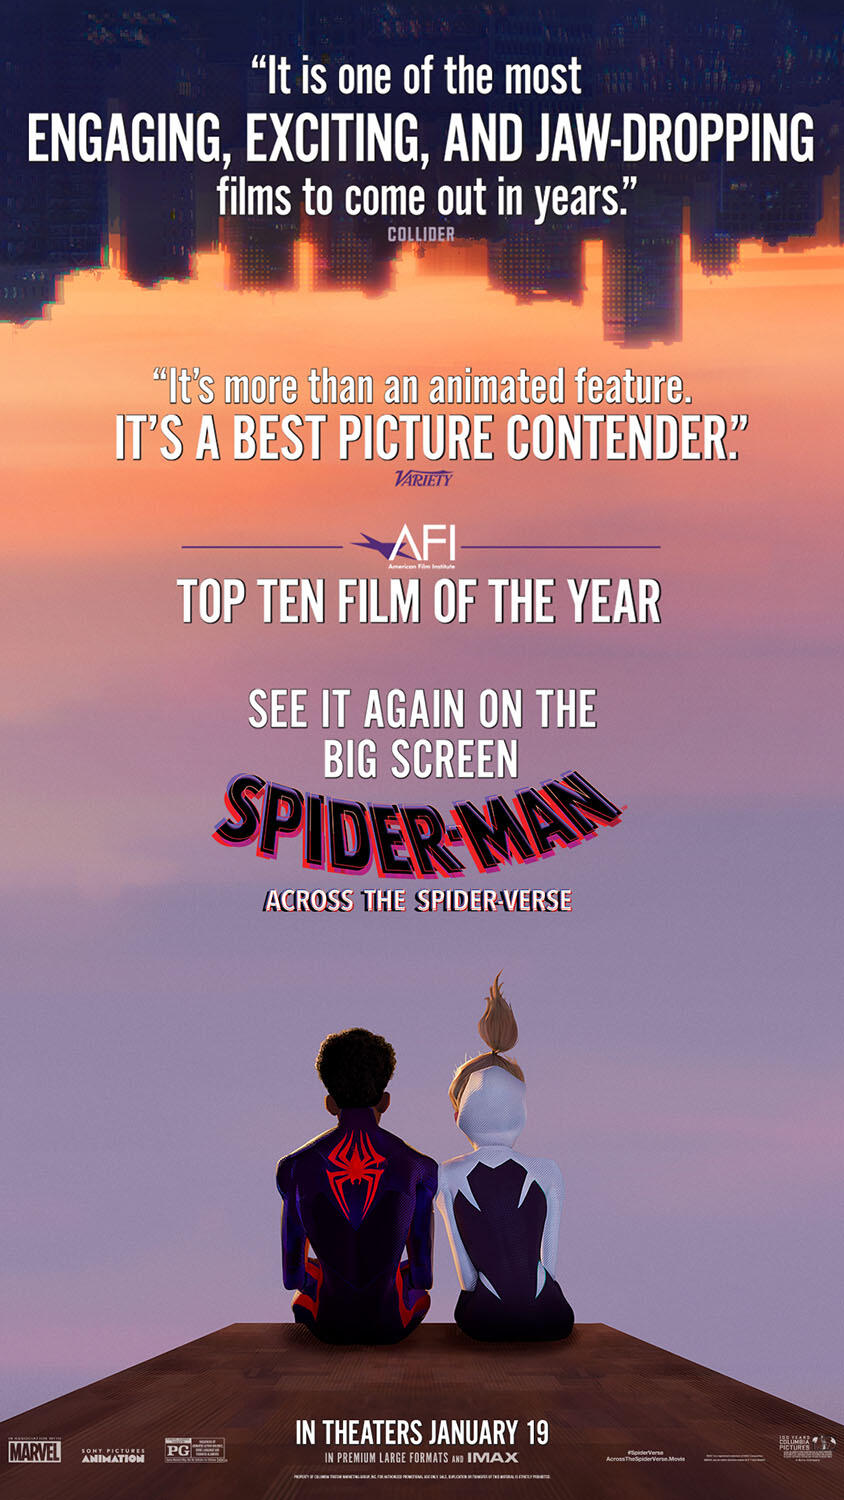 Spider-Man: Across the Spider-Verse is the first great movie in a new genre.